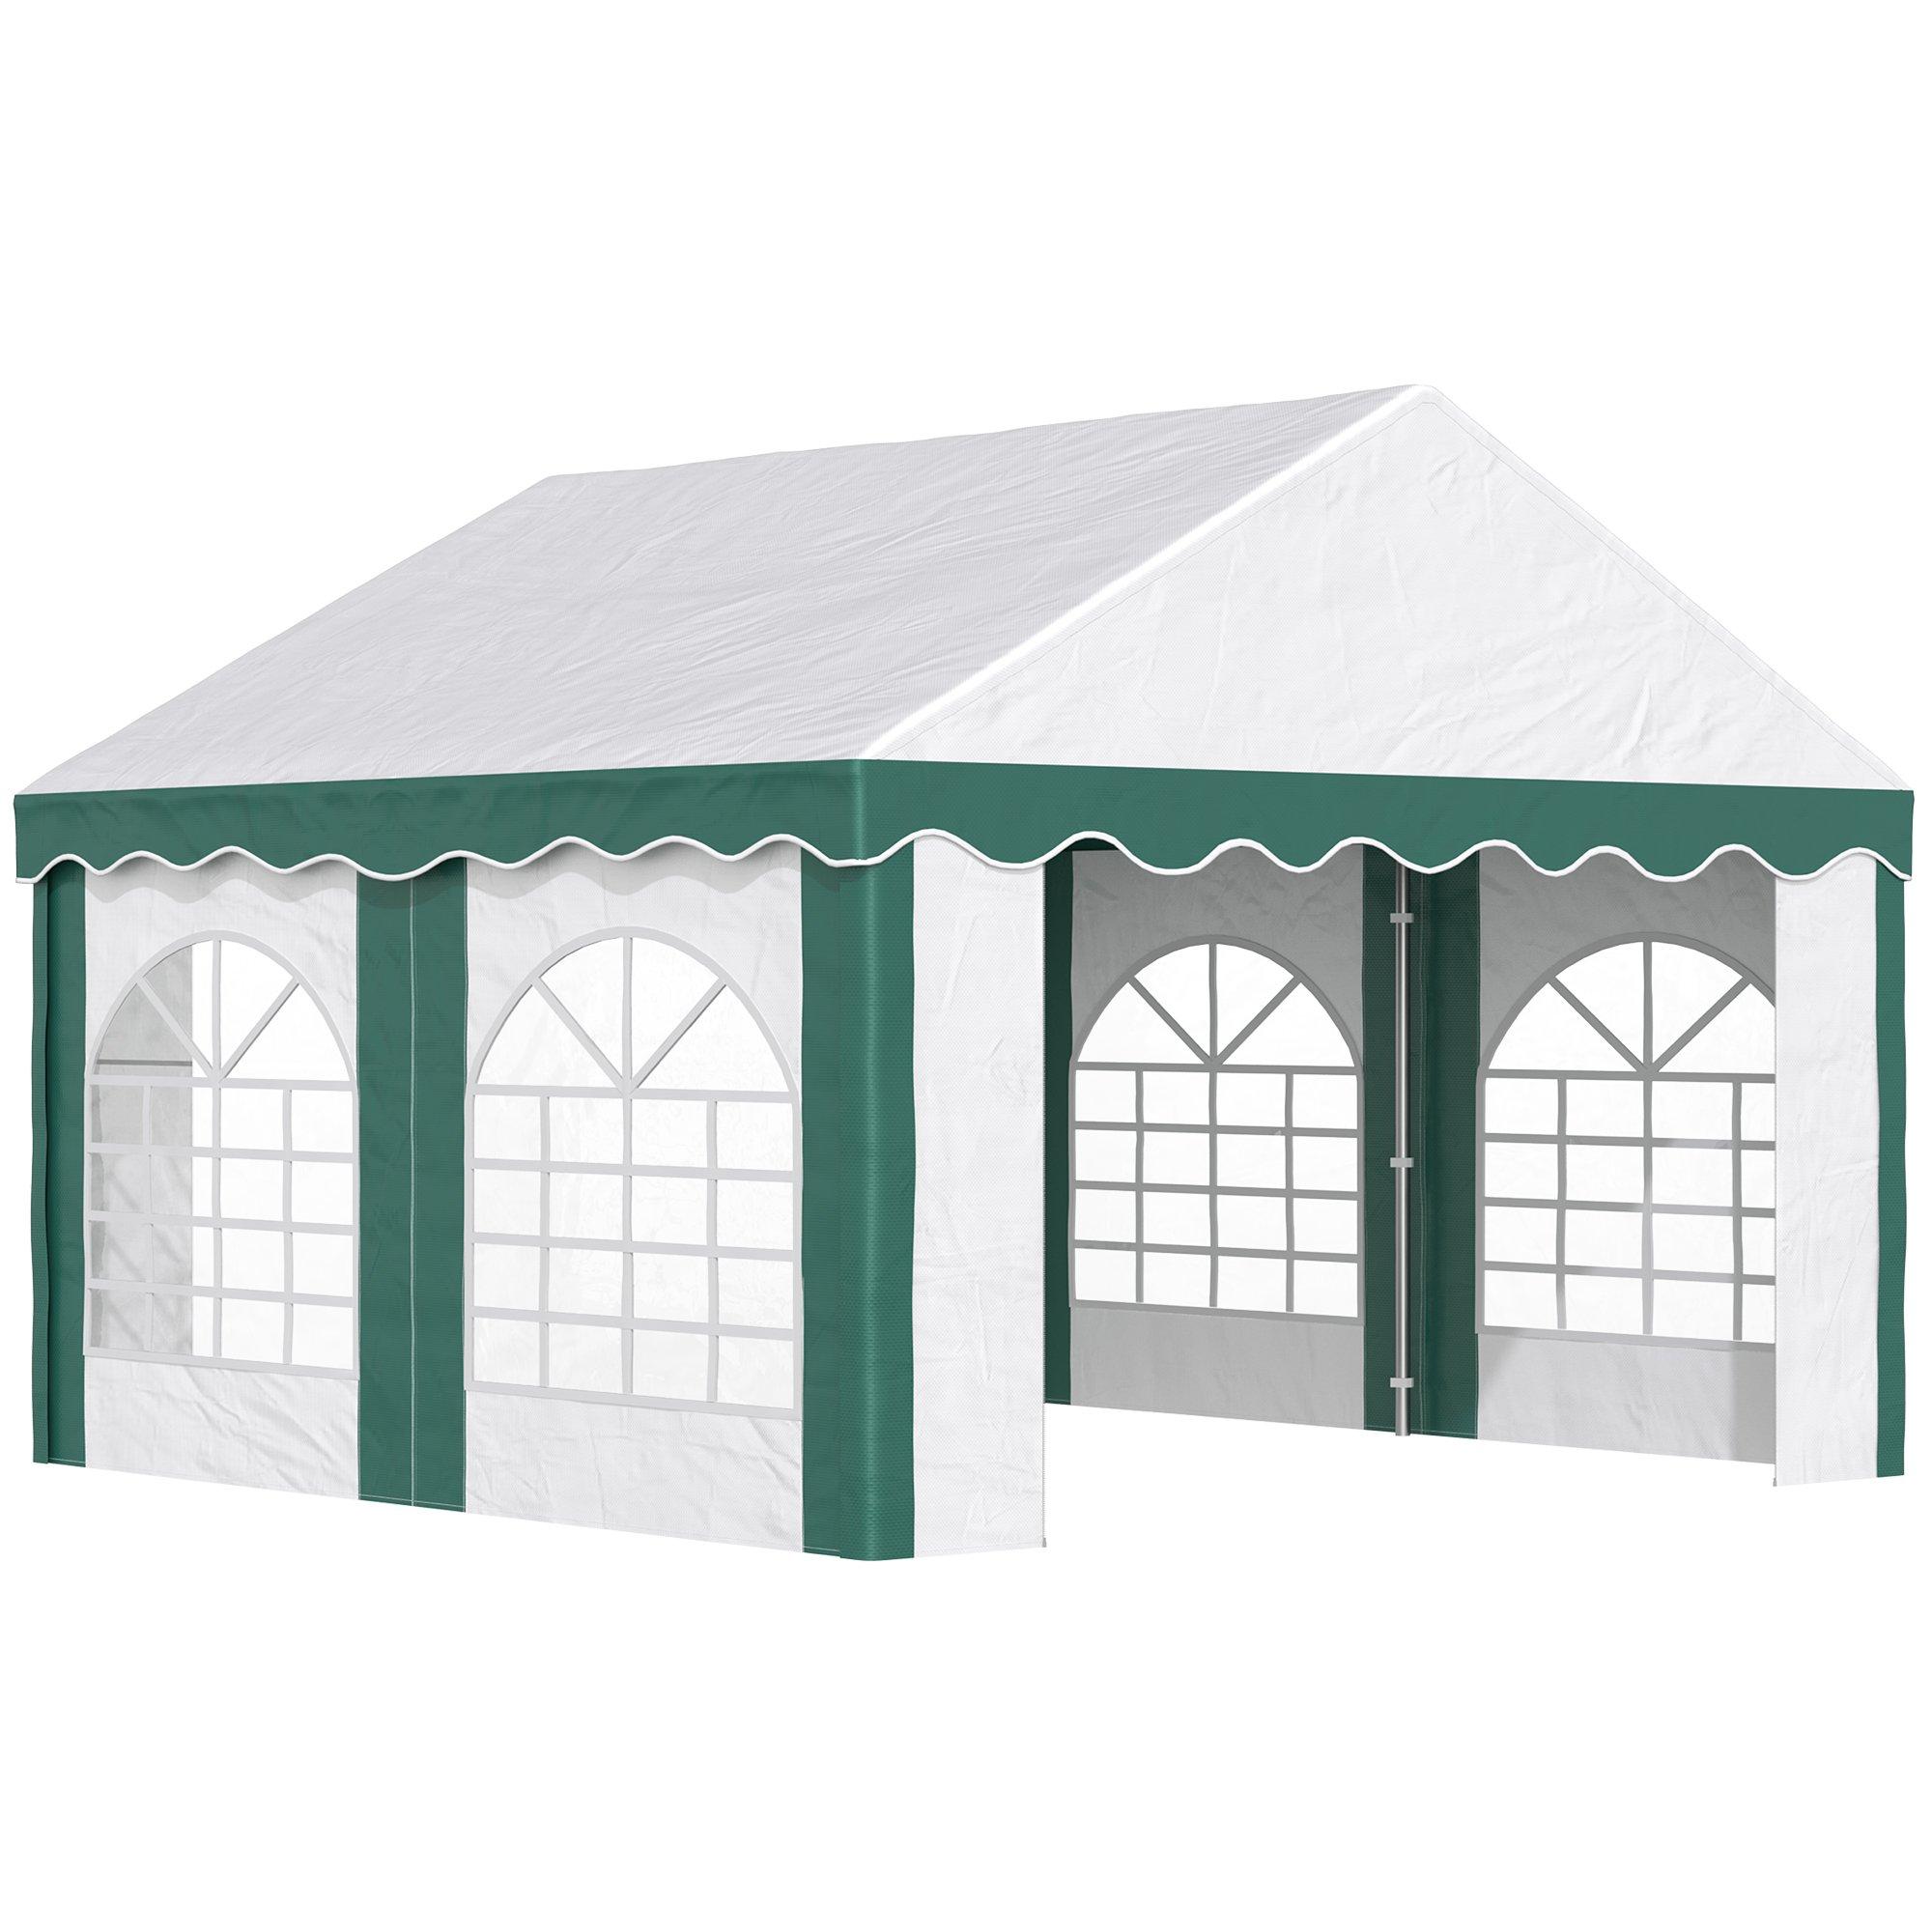 4 x 4m Marquee Gazebo, Party Tent with Sides and Double Doors